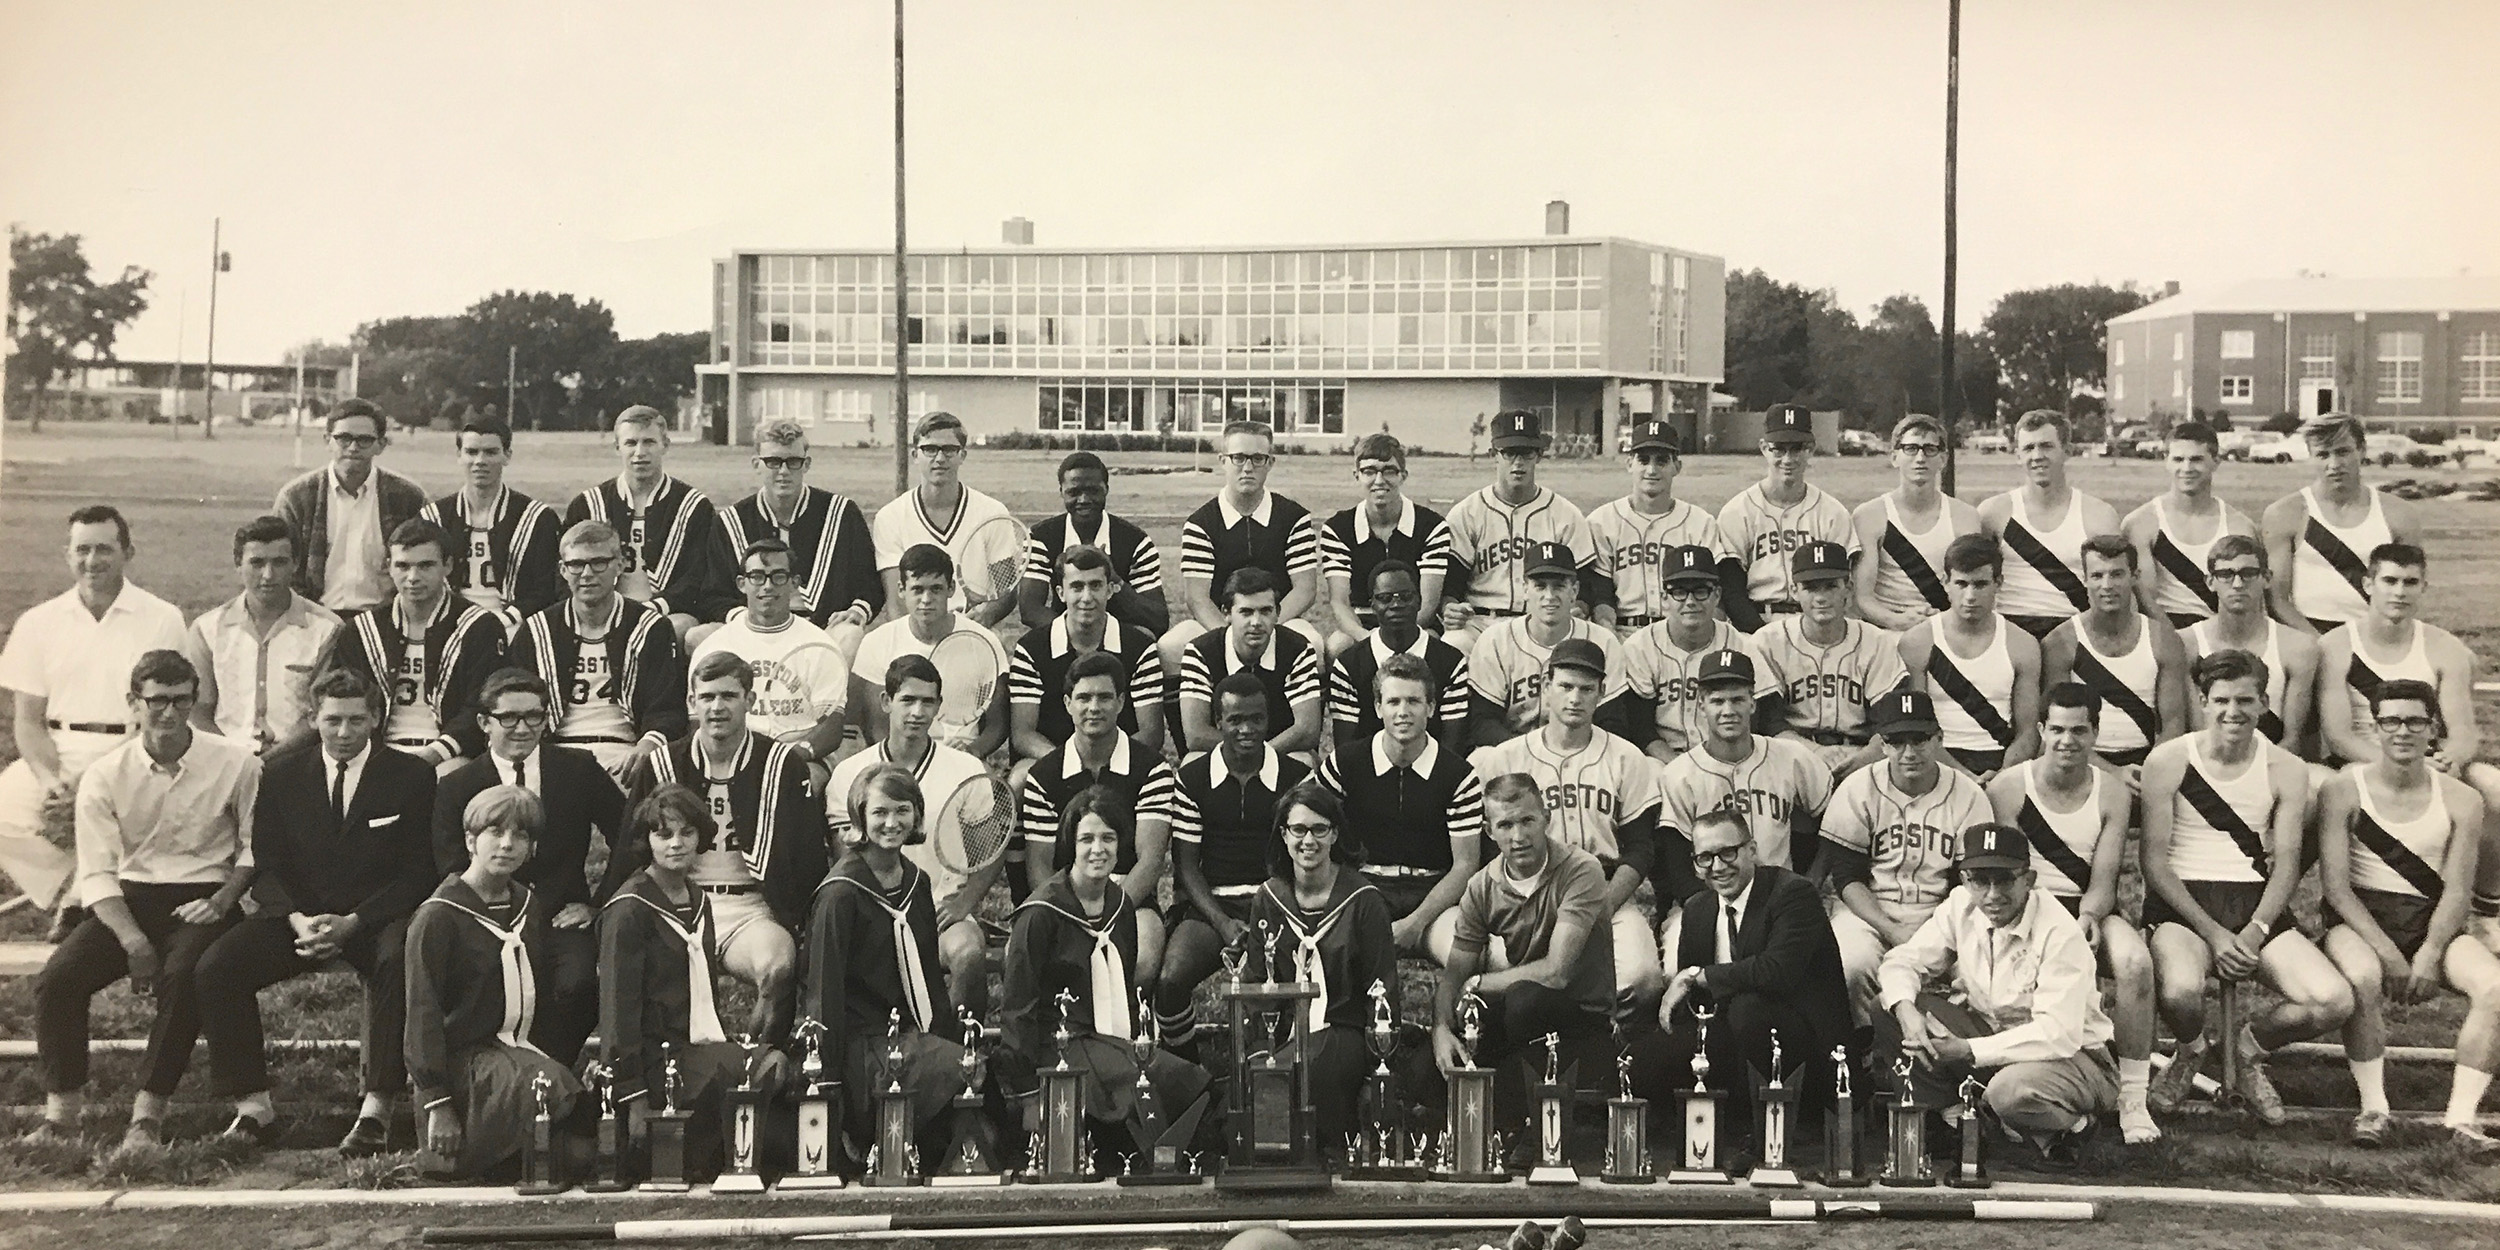 Student-athletes who won conference honors circa 1960s. Oswald is front row, right.